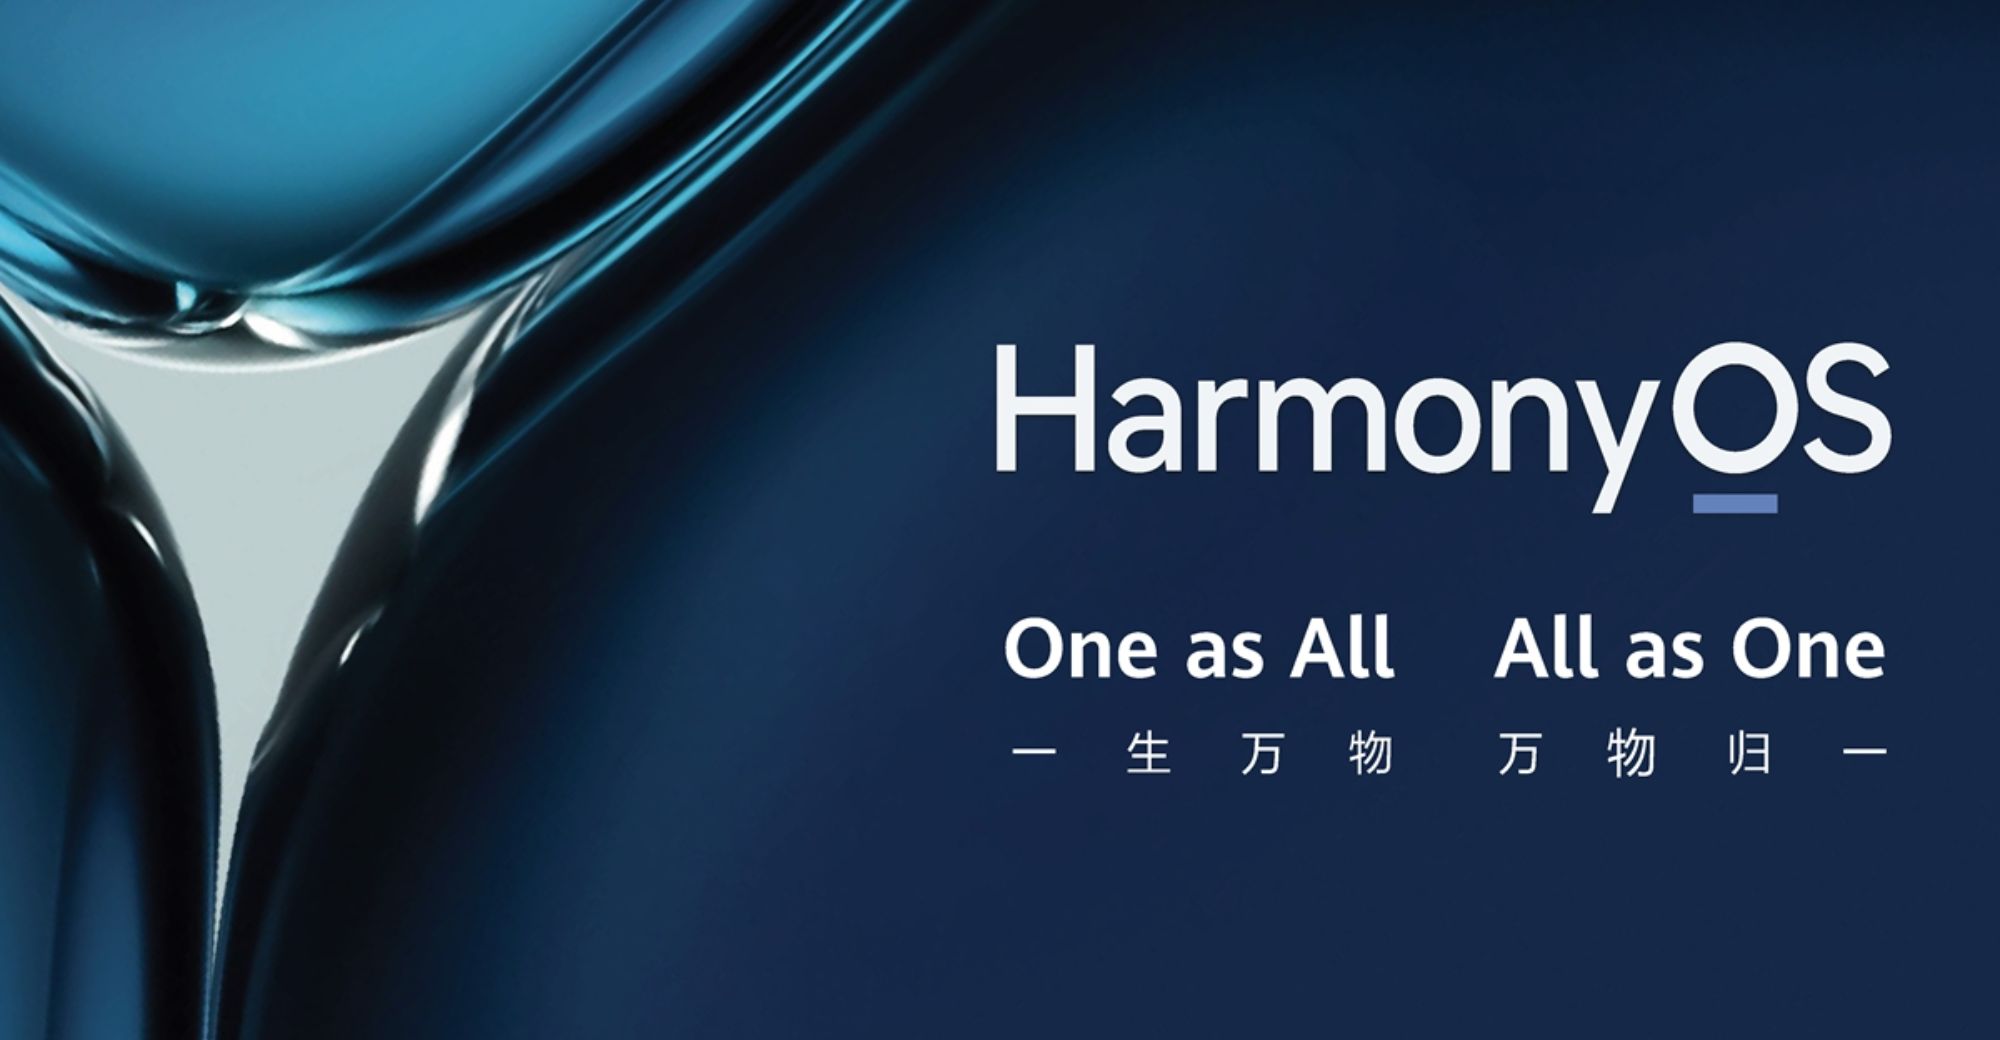 Huawei’s HarmonyOS Will No Longer Support Android Apps